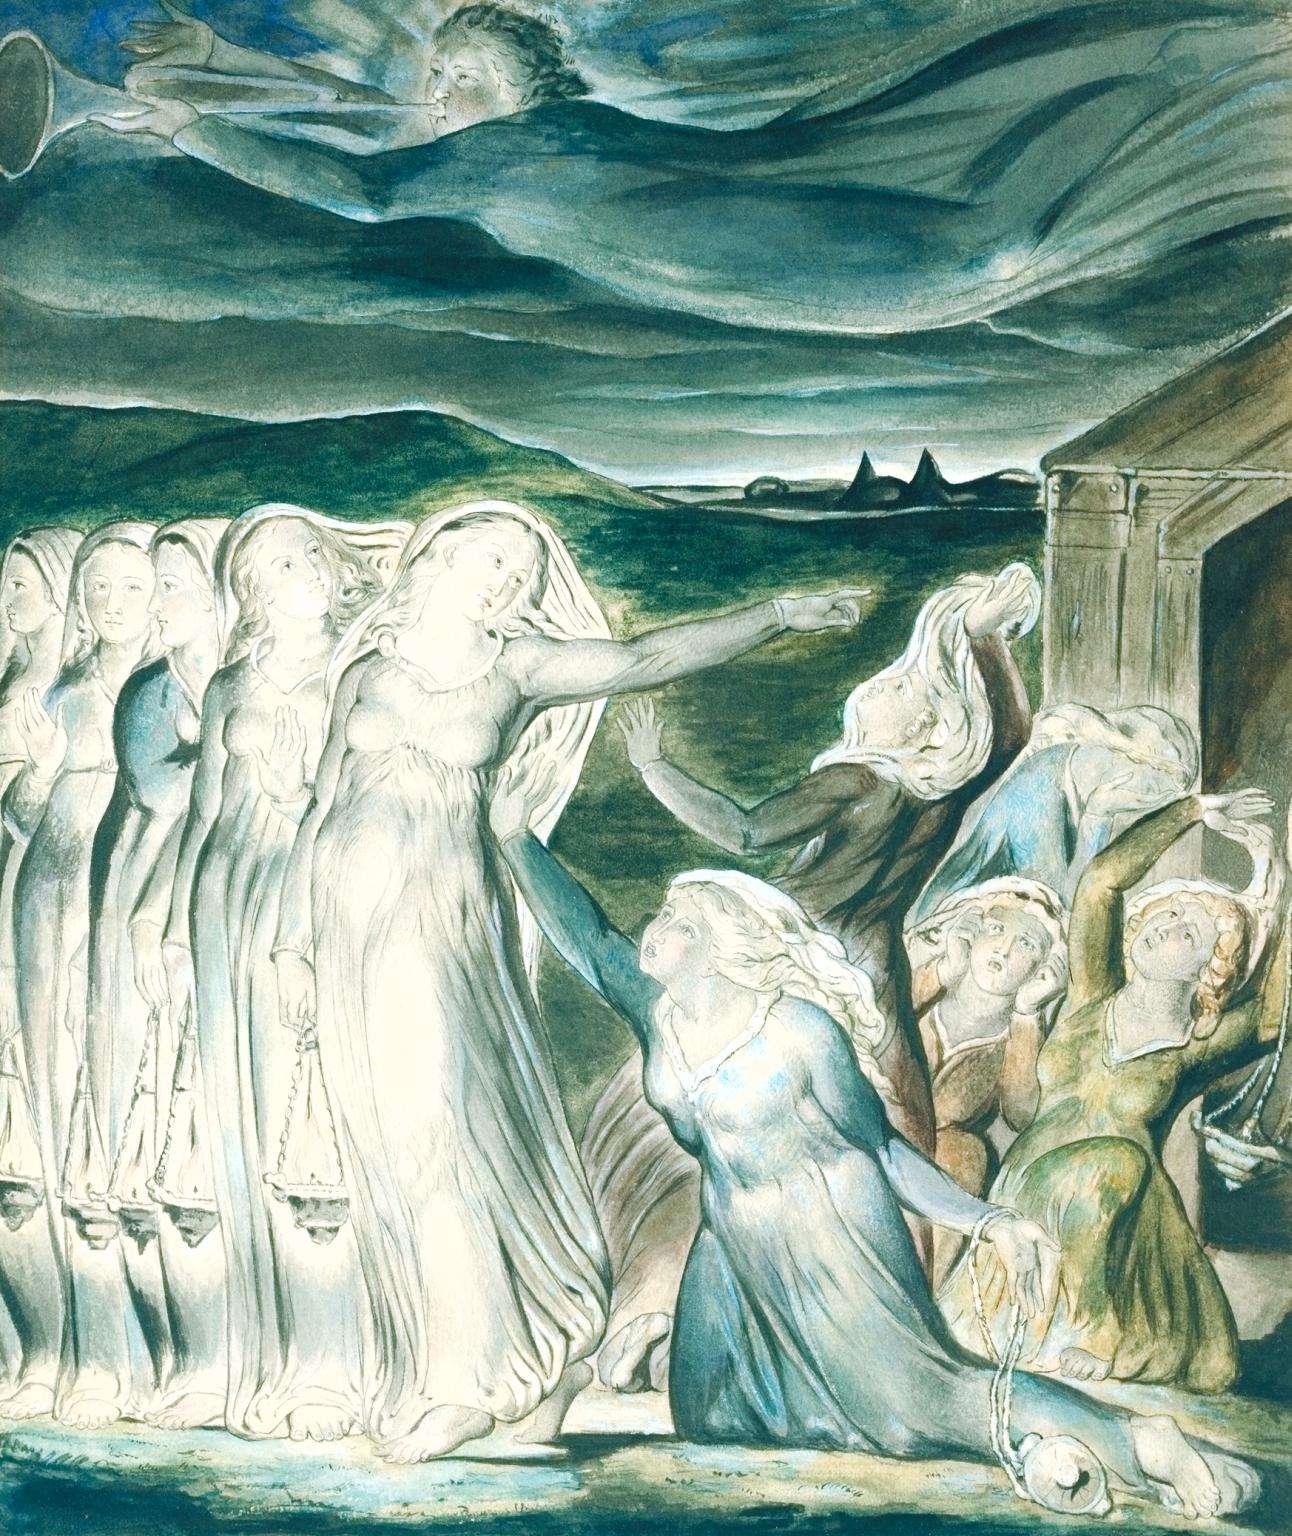 The parable of the ten bridesmaids. It was long thought that this watercolour painting was by William Blake, but it finally turned out to be a copy of a Blake original, painted for Sir Thomas Lawrence in about 1825. Tate gallery, London.